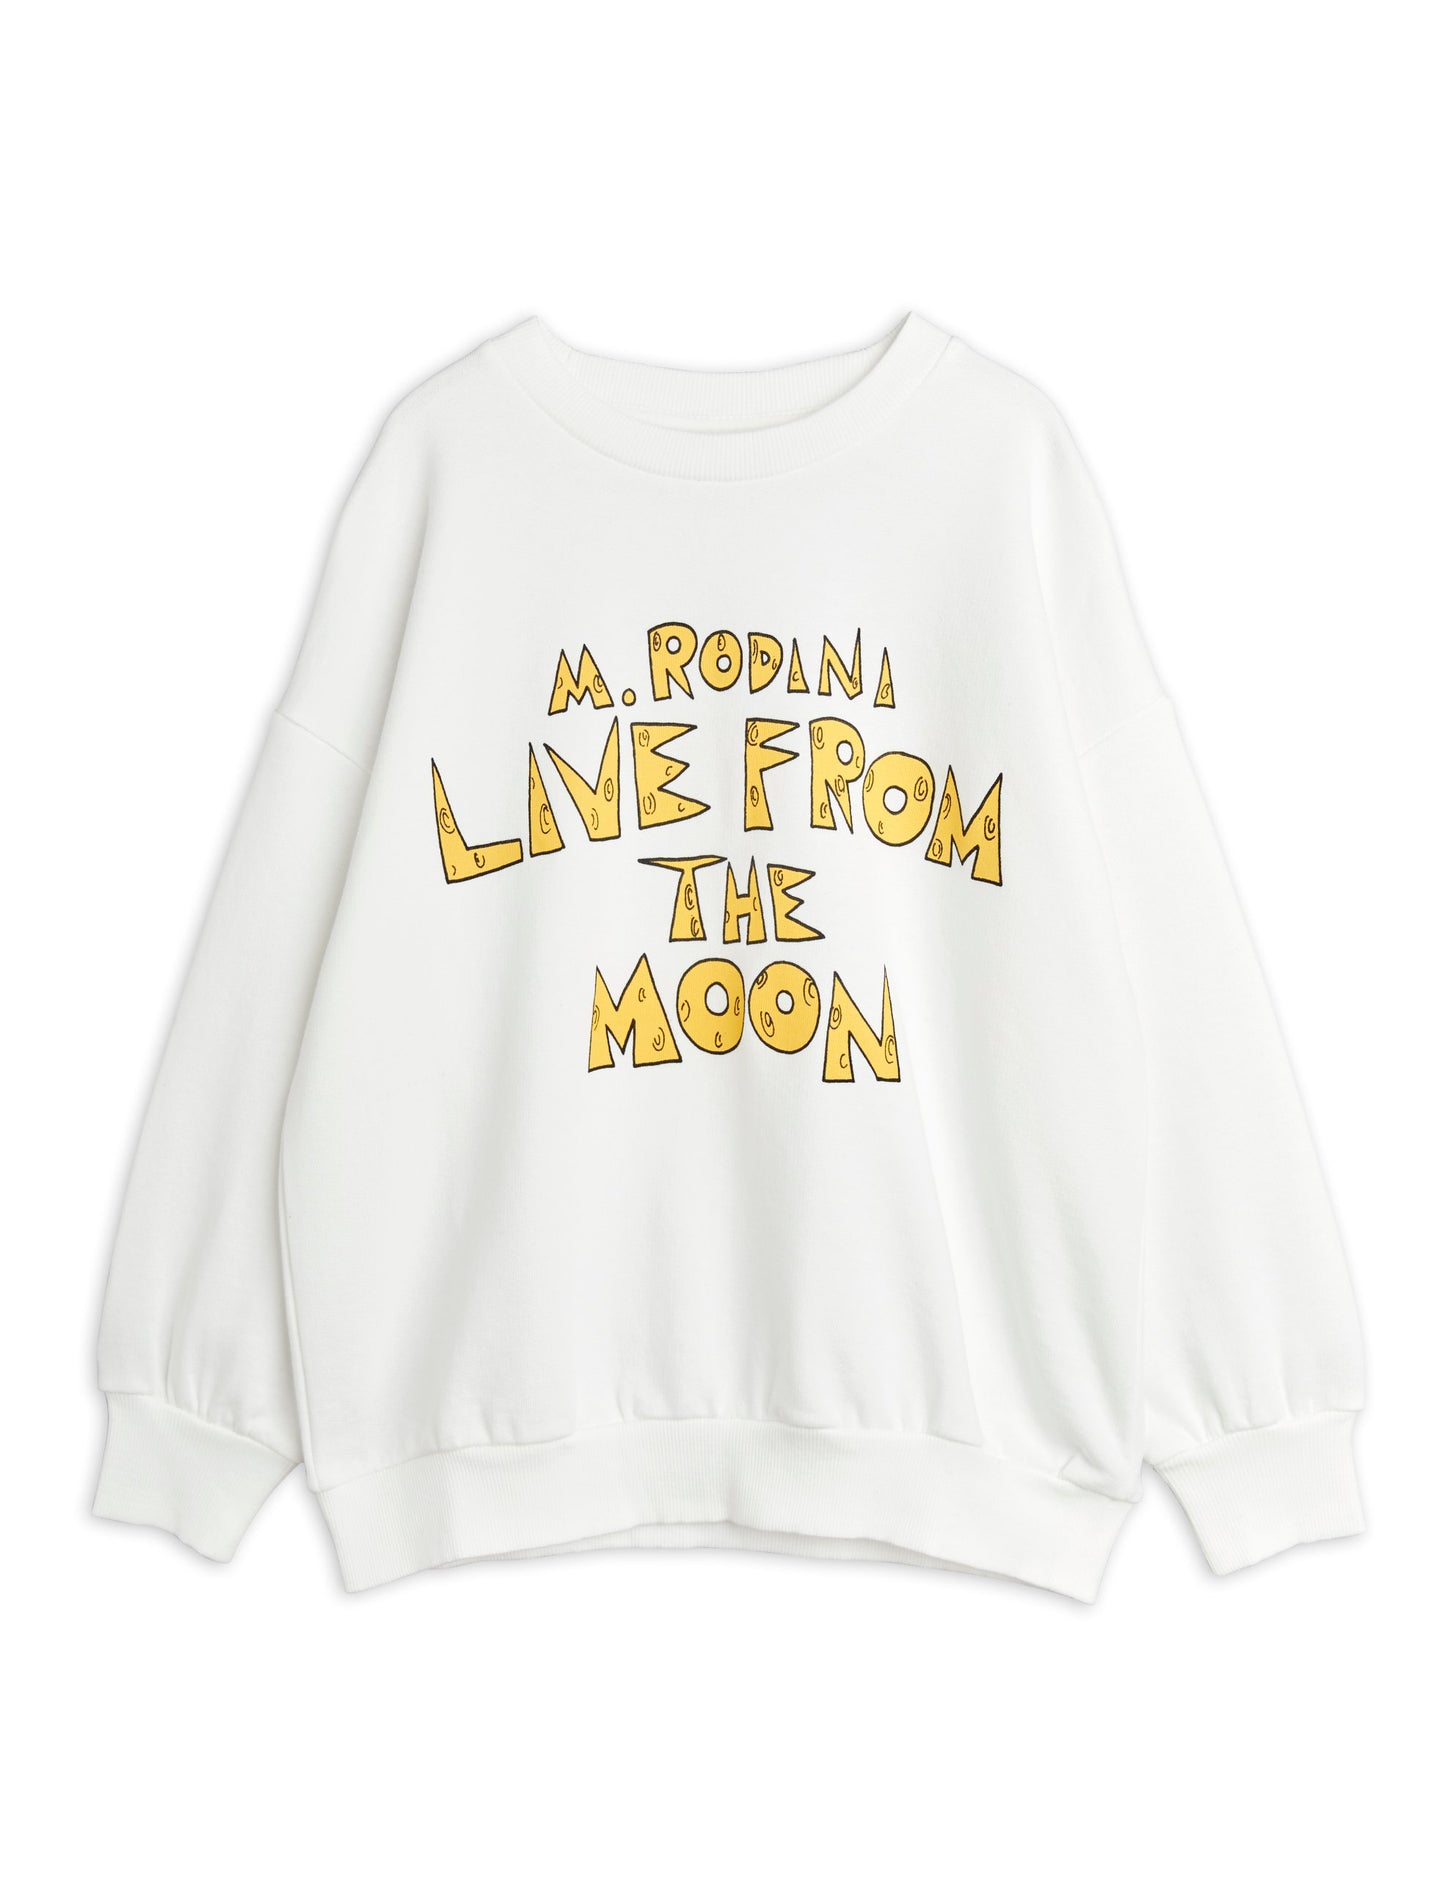 Live From The Moon Sweatshirt White